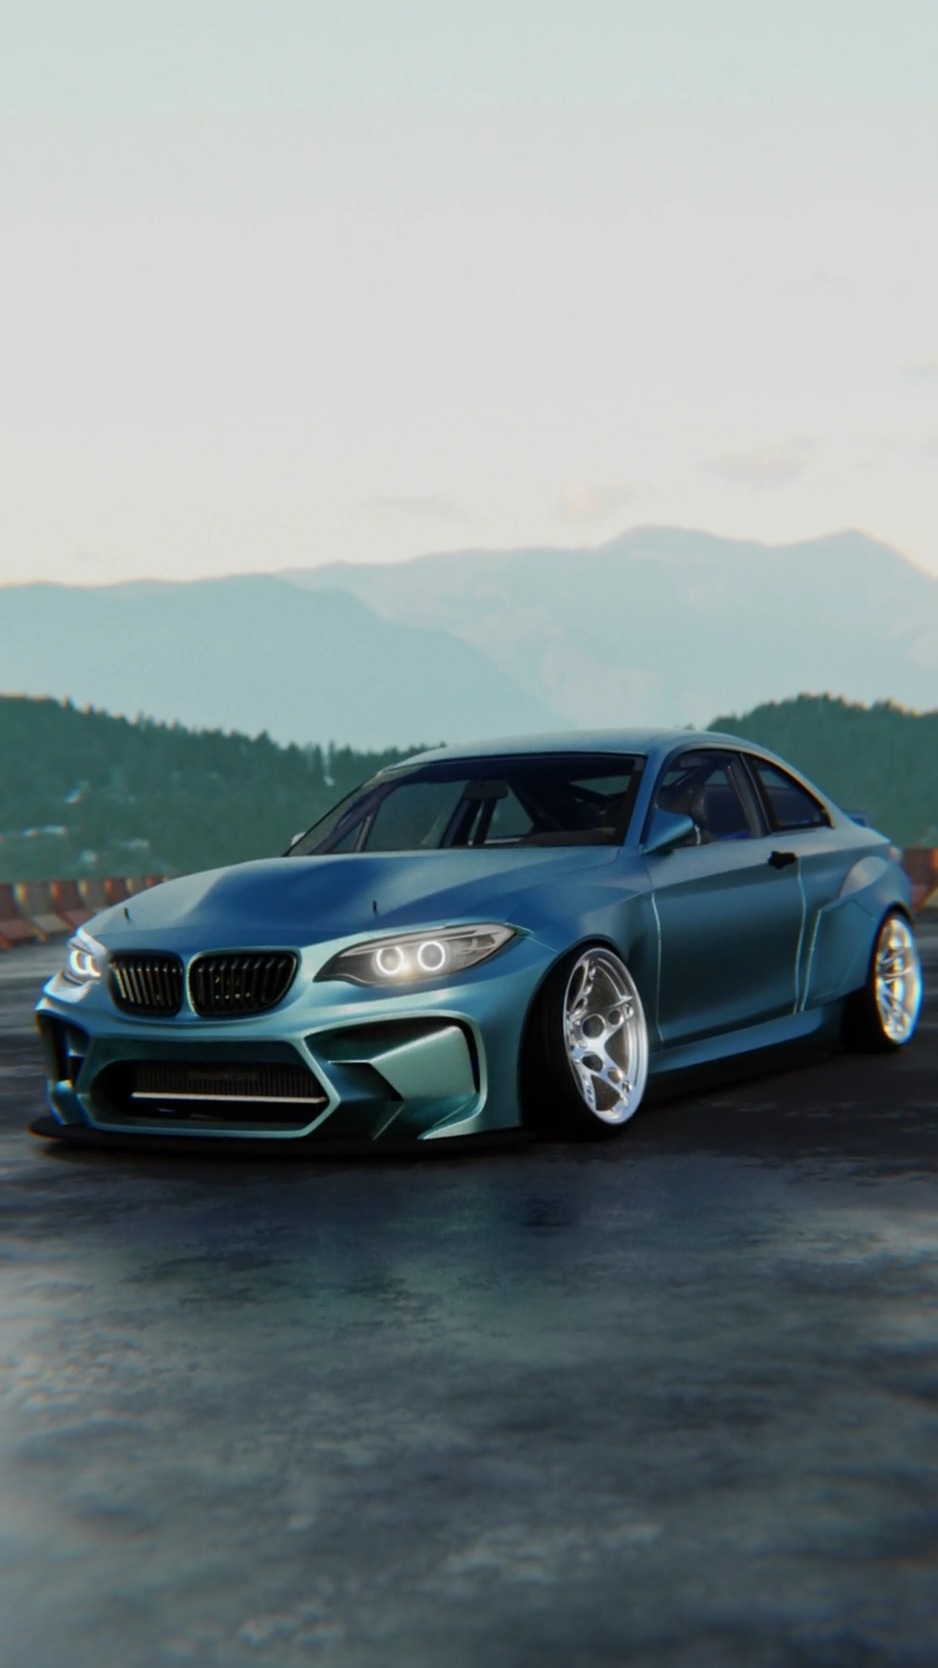 thumb for Bmw M2 Live Wallpaper